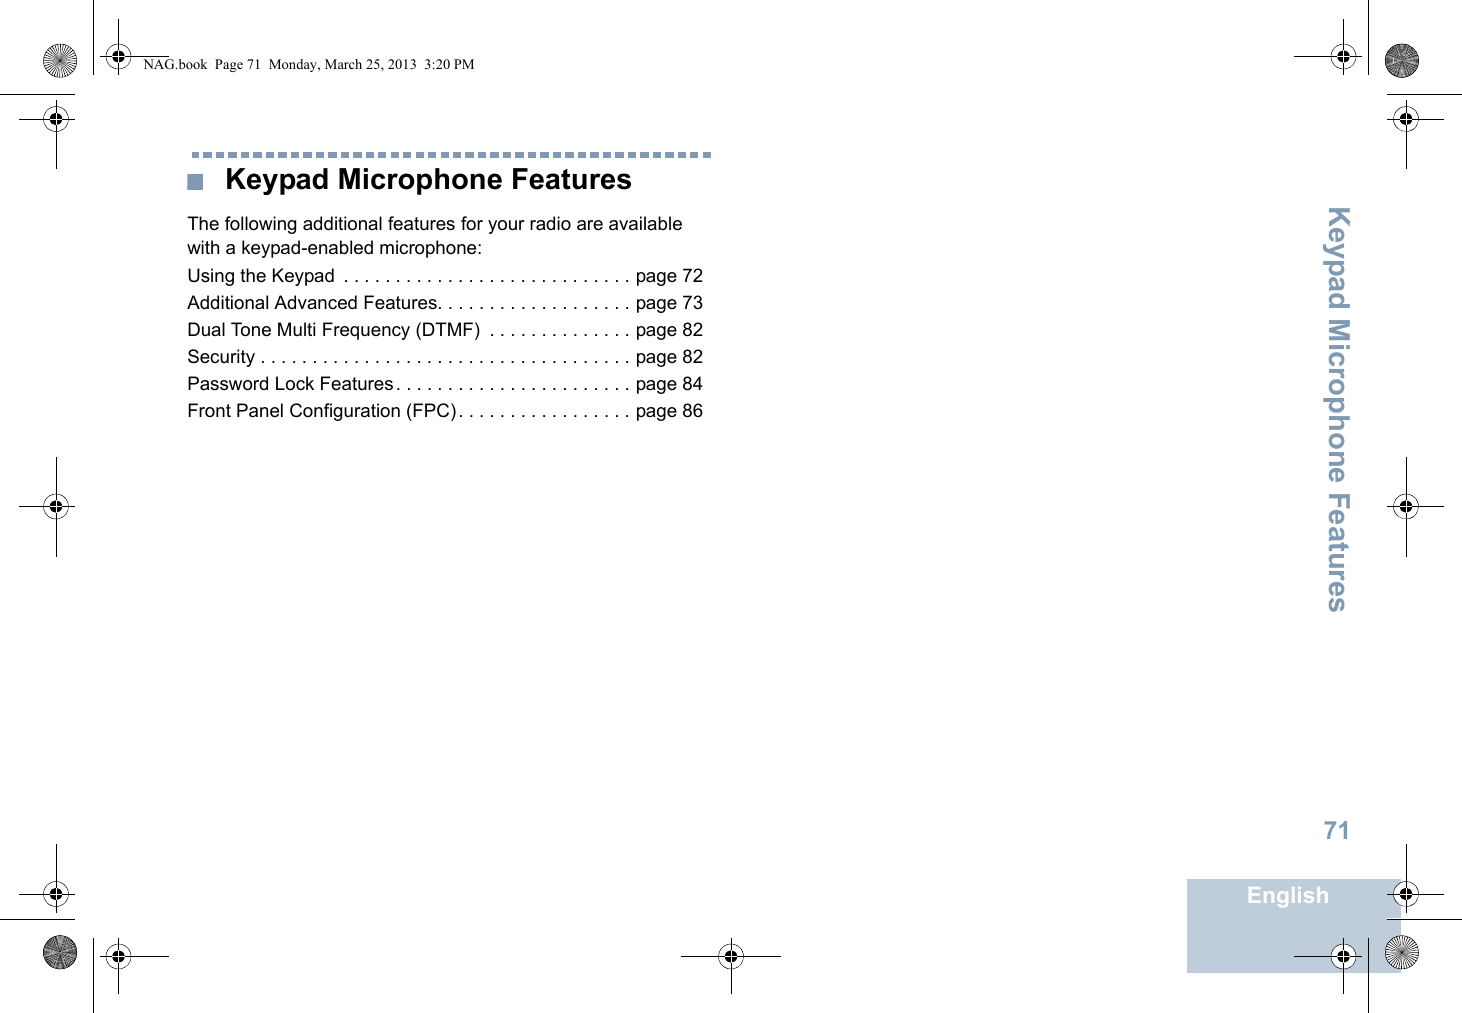 Keypad Microphone FeaturesEnglish71 Keypad Microphone FeaturesThe following additional features for your radio are available with a keypad-enabled microphone:Using the Keypad  . . . . . . . . . . . . . . . . . . . . . . . . . . . . page 72Additional Advanced Features. . . . . . . . . . . . . . . . . . . page 73Dual Tone Multi Frequency (DTMF)  . . . . . . . . . . . . . . page 82Security . . . . . . . . . . . . . . . . . . . . . . . . . . . . . . . . . . . . page 82Password Lock Features. . . . . . . . . . . . . . . . . . . . . . . page 84Front Panel Configuration (FPC). . . . . . . . . . . . . . . . . page 86NAG.book  Page 71  Monday, March 25, 2013  3:20 PM